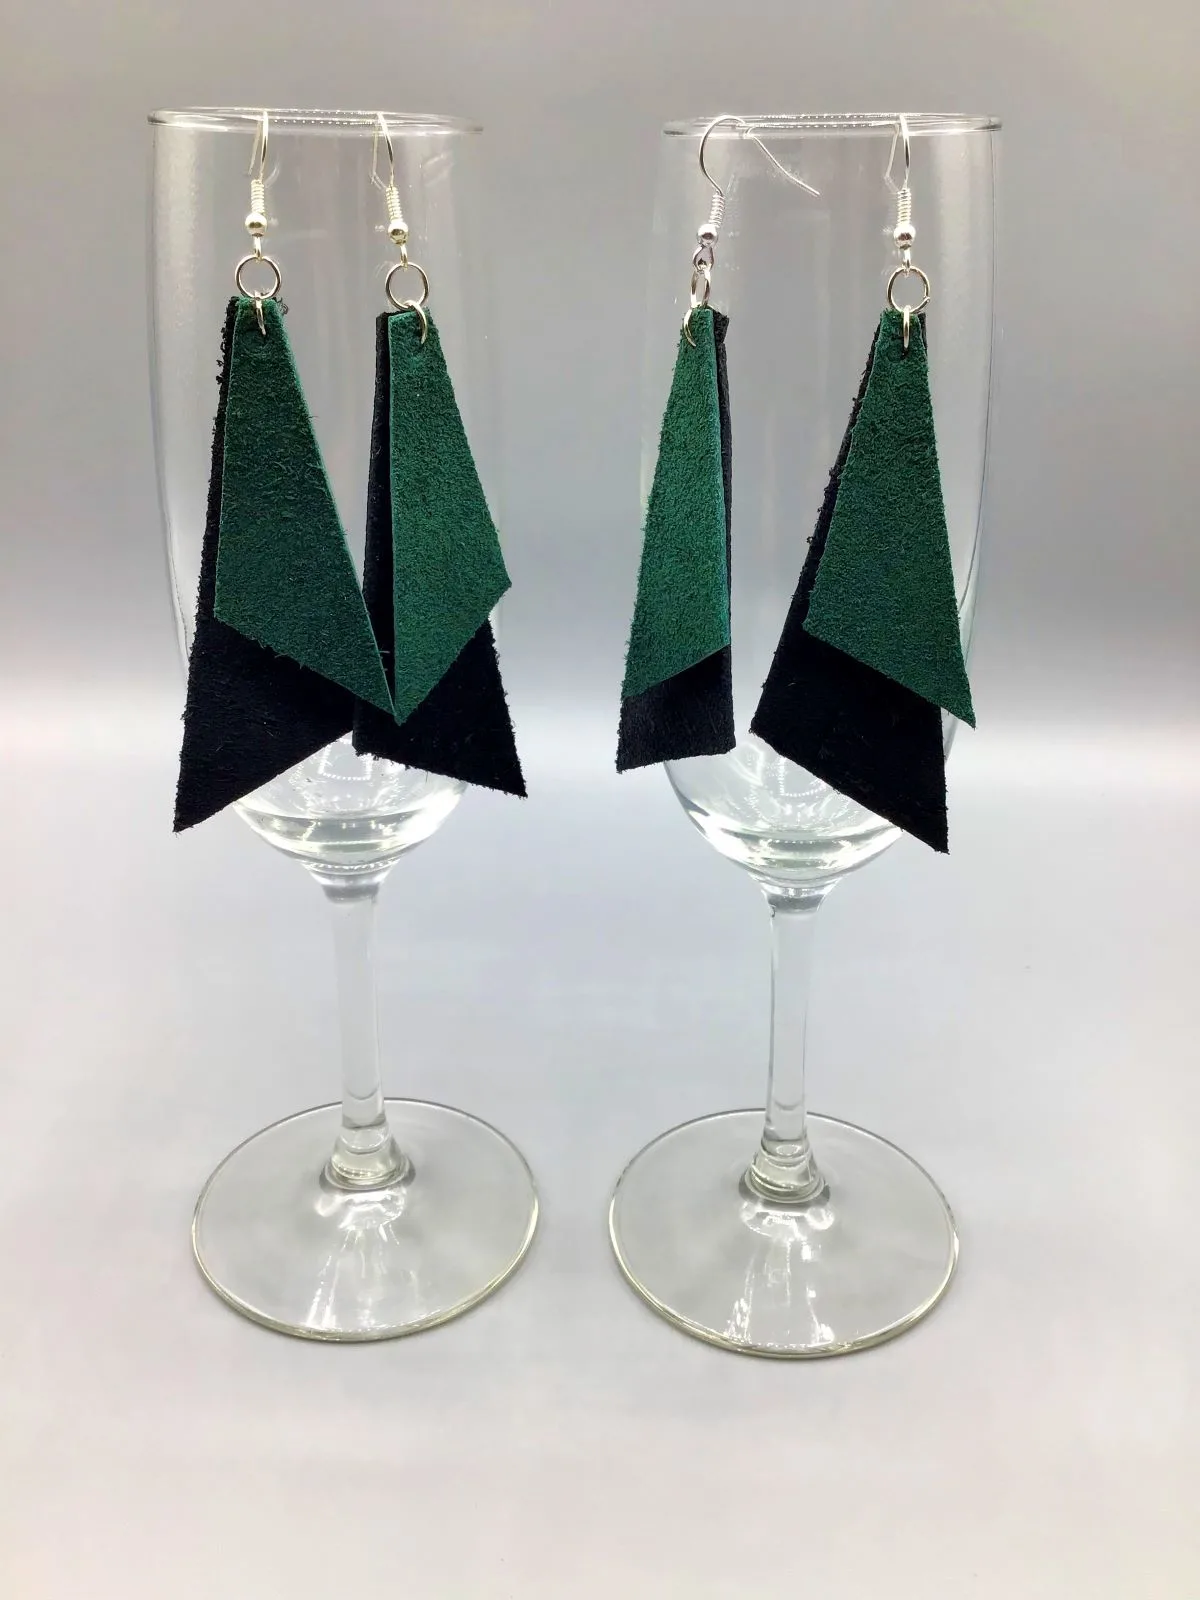 Two-Layer Leather Earrings